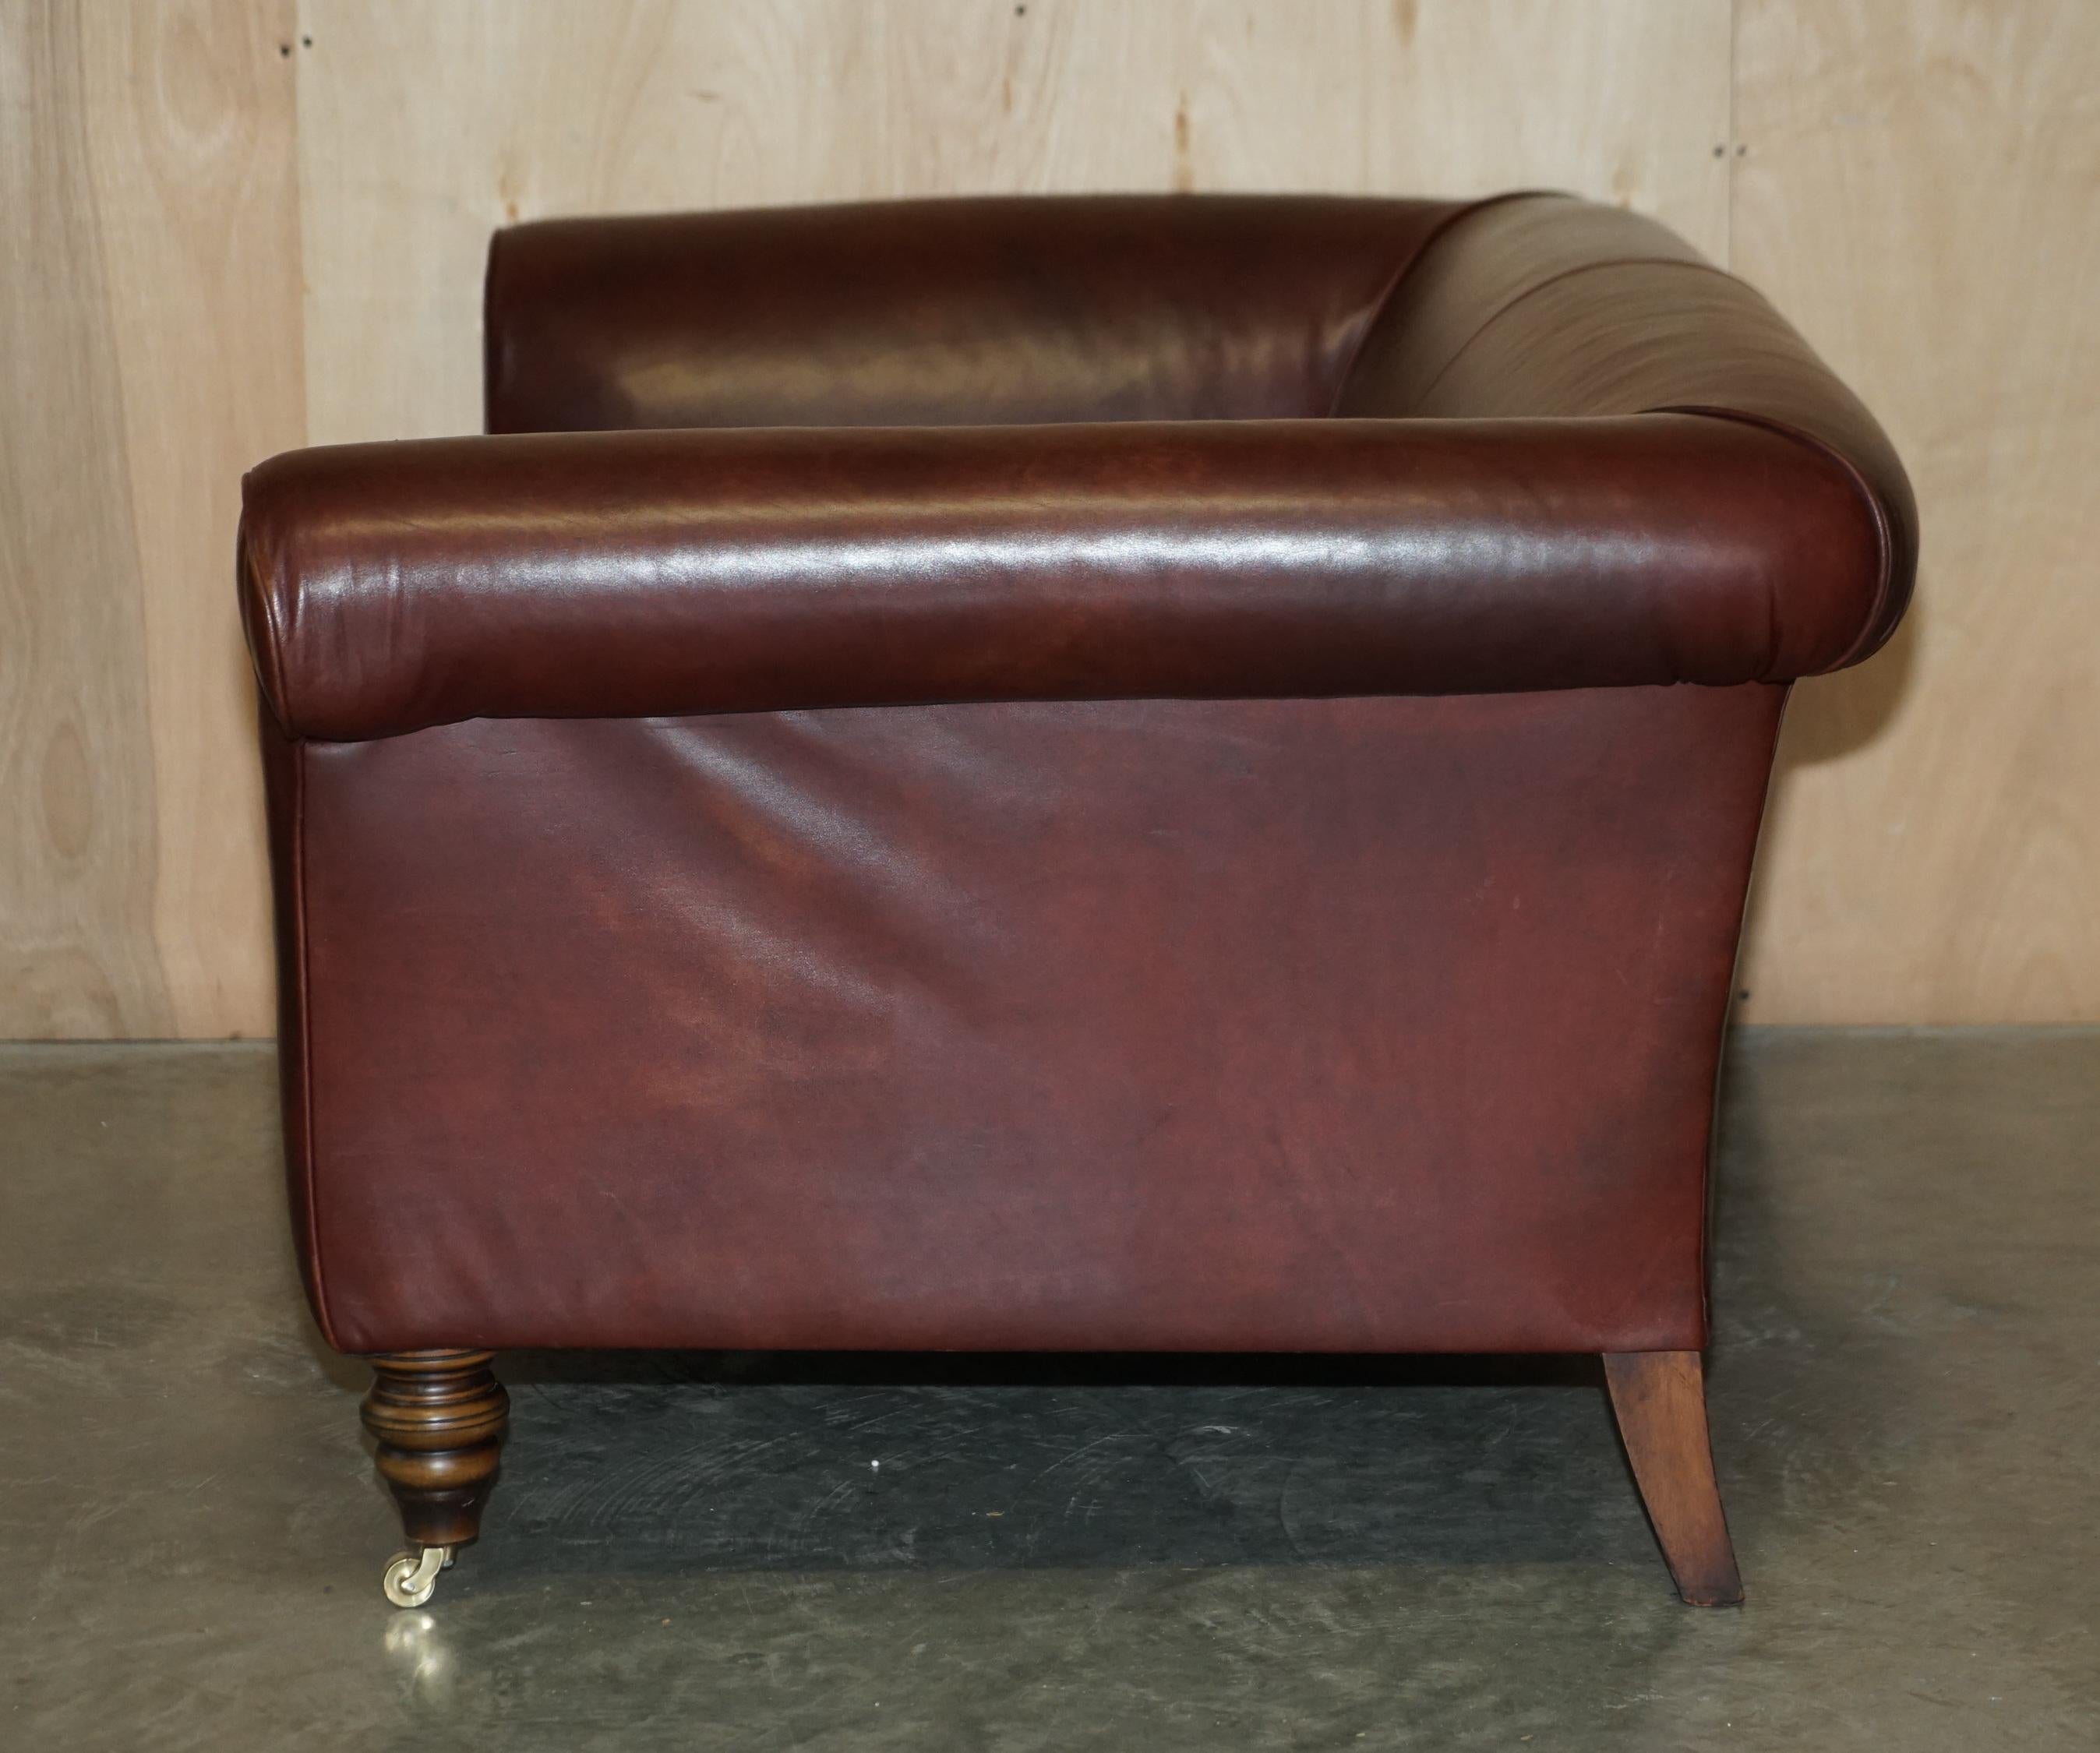 ViNTAGE DYED BROWN LEATHER ART DECO THREE SEAT SOFA FEATHER FILLED SEAT en vente 12